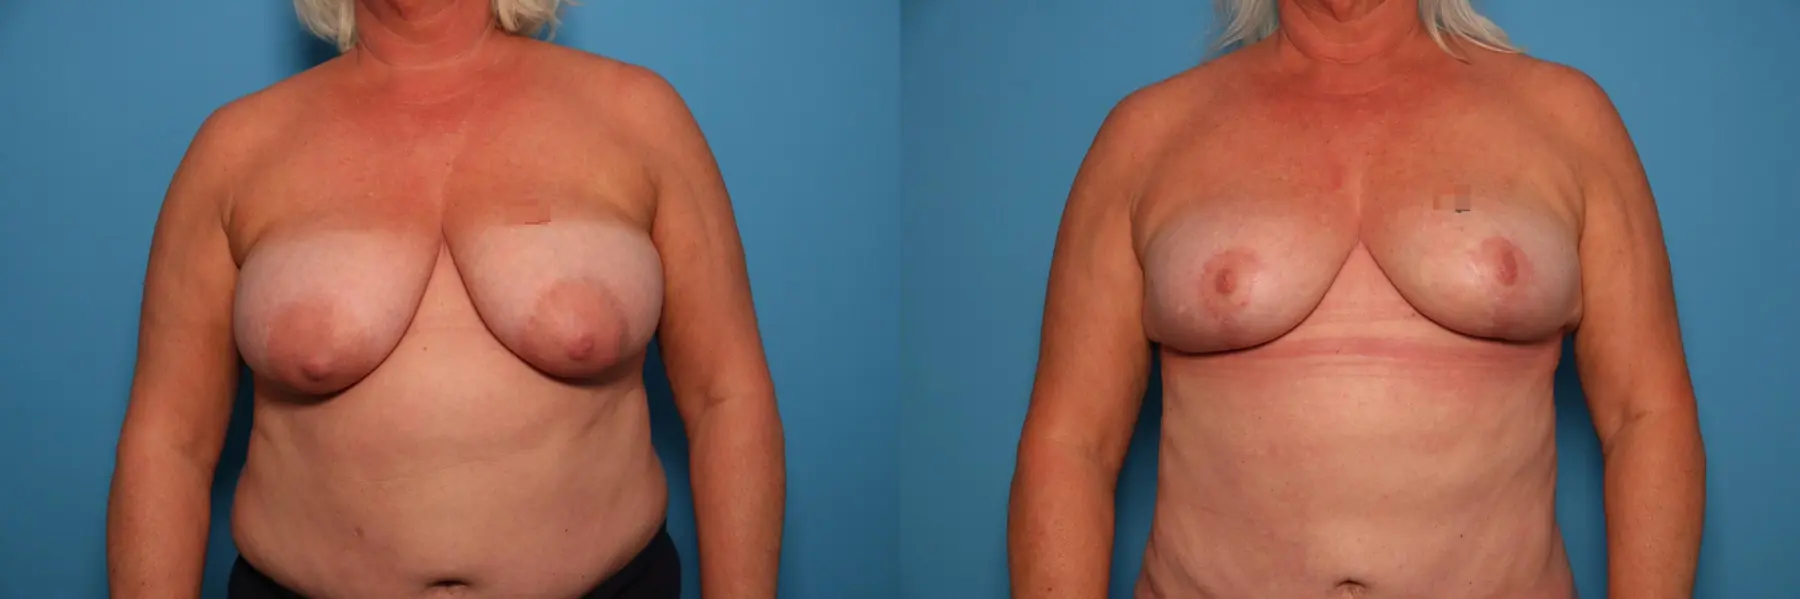 Breast Lift-Reduction: Patient 8 - Before and After  